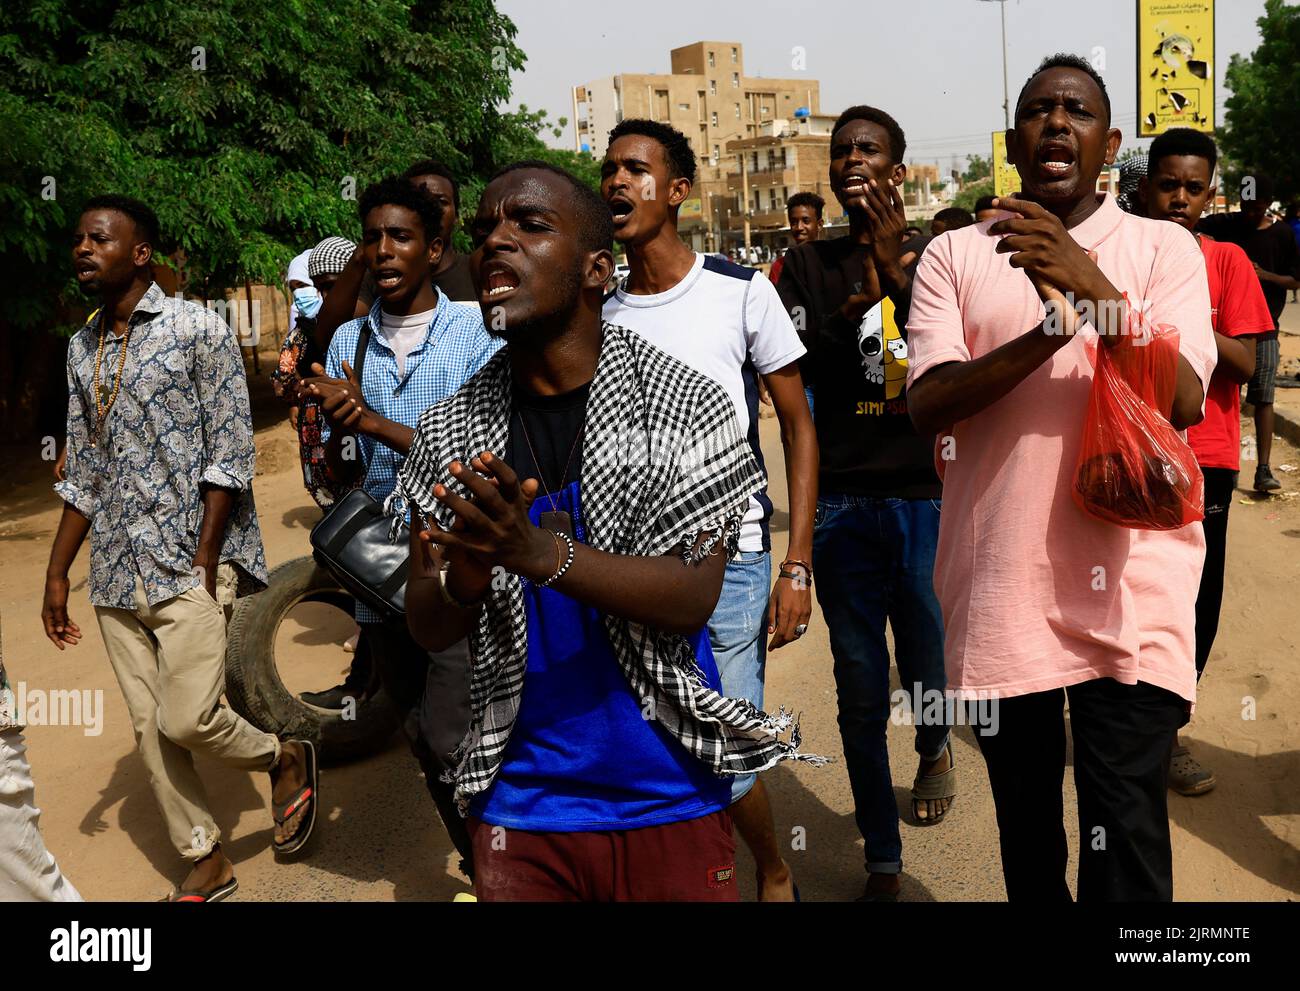 Protesters march through the capital Khartoum during a rally against military rule following the last coup, in Khartoum, Sudan August 25, 2022. REUTERS/Mohamed Nureldin Abdallah Stock Photo